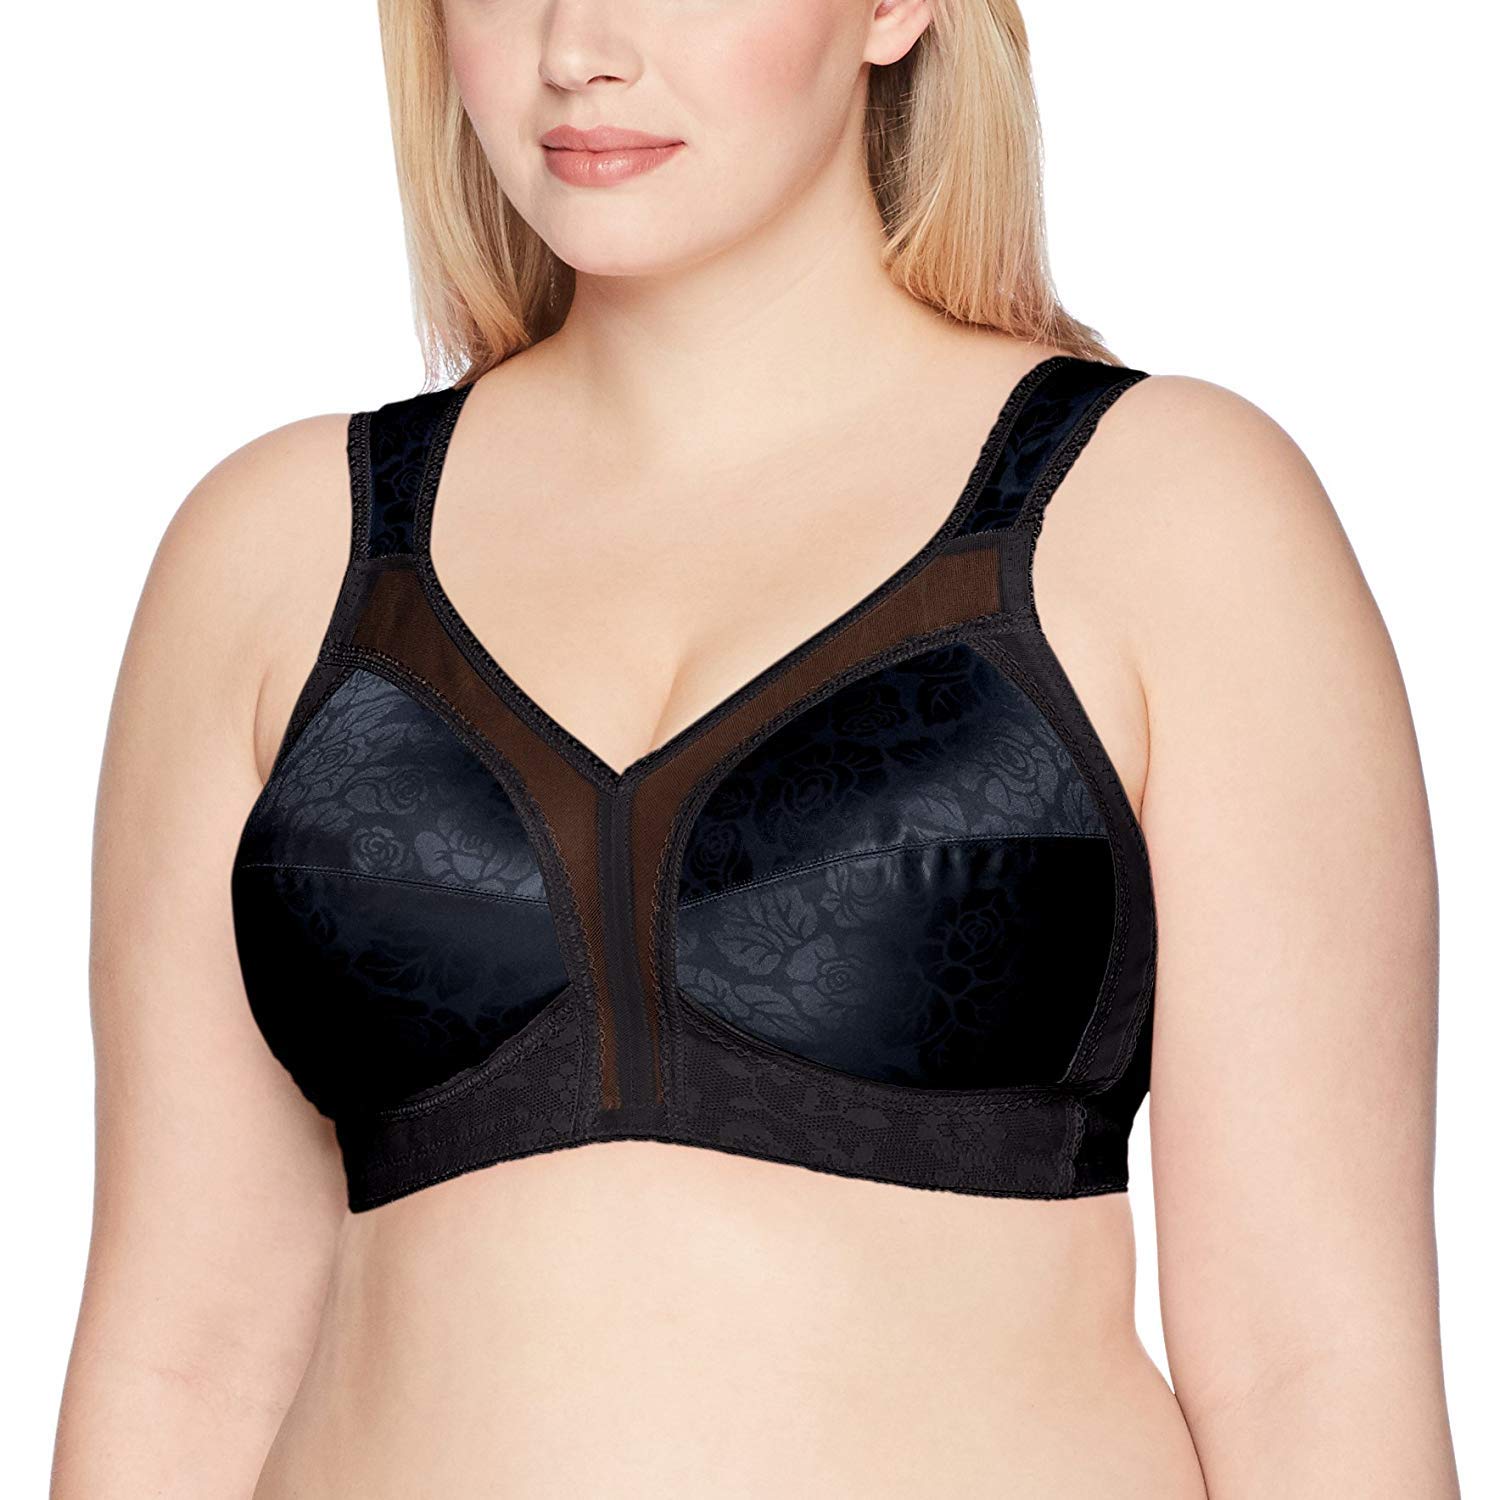 Playtex Women's 18 Hour Original Comfort Strap Full Coverage Bra Us4693, Available in Single and 2-Pack